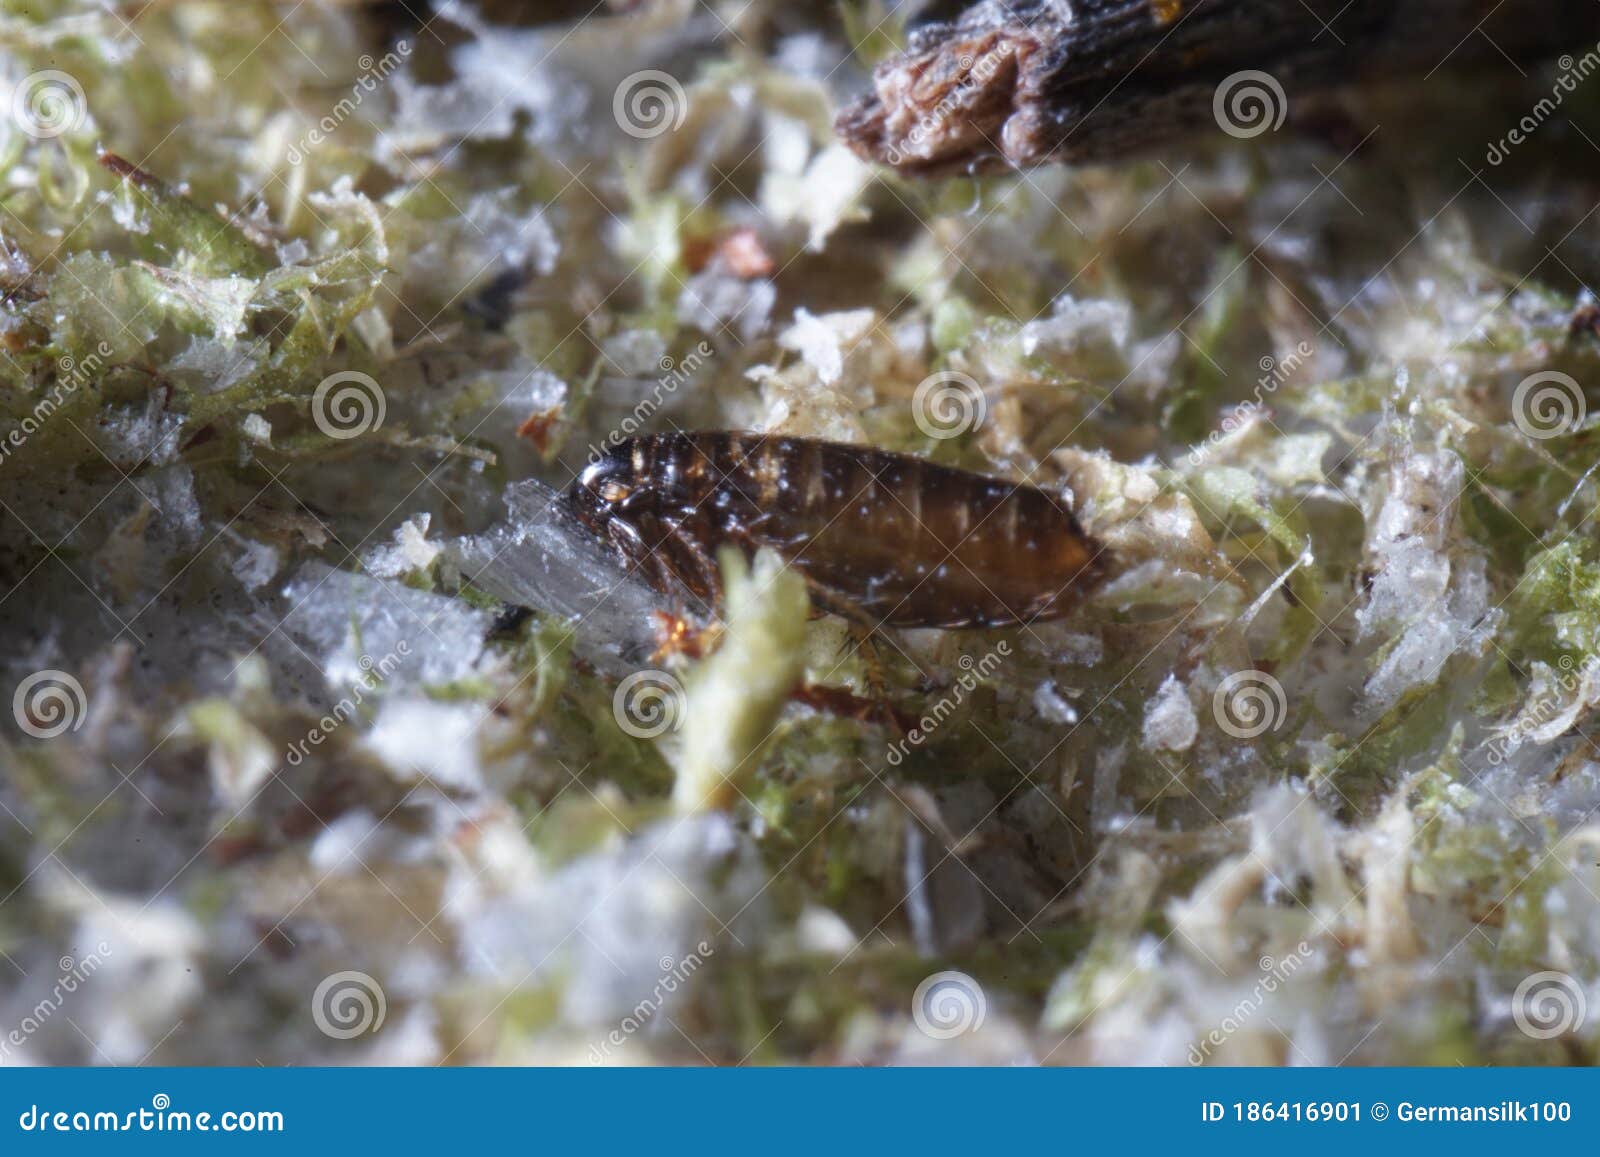 super macro close up of ceratophyllus gallinae, known as the hen flea or european chicken fle